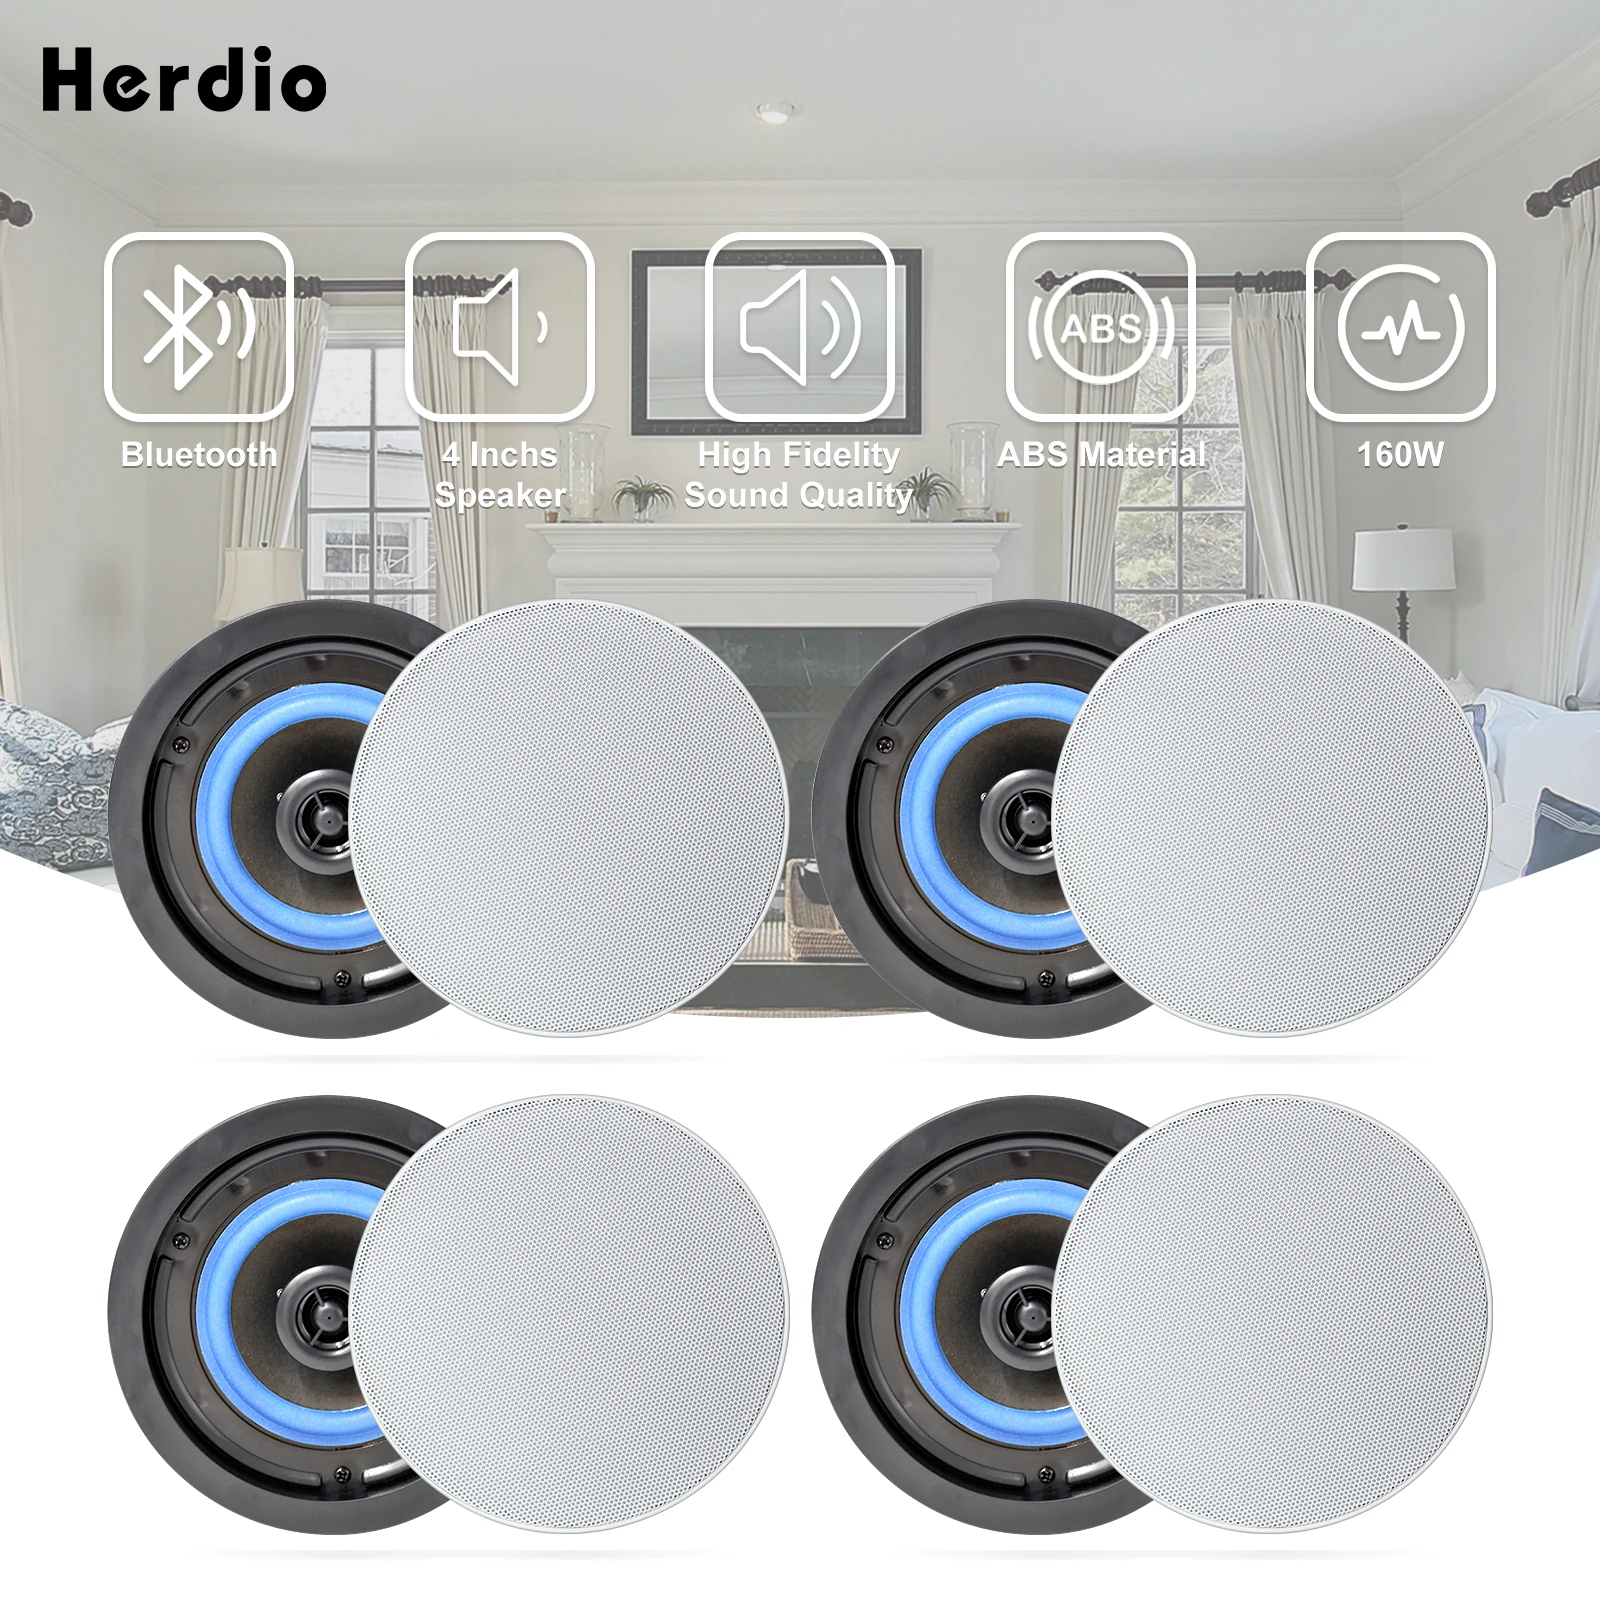 

2 Pairs Herdio 4 Inches 320 Watts 2 Way Flush Mount Bluetooth Ceiling Speakers Perfect For Bathroom Kitchen Living Room Office